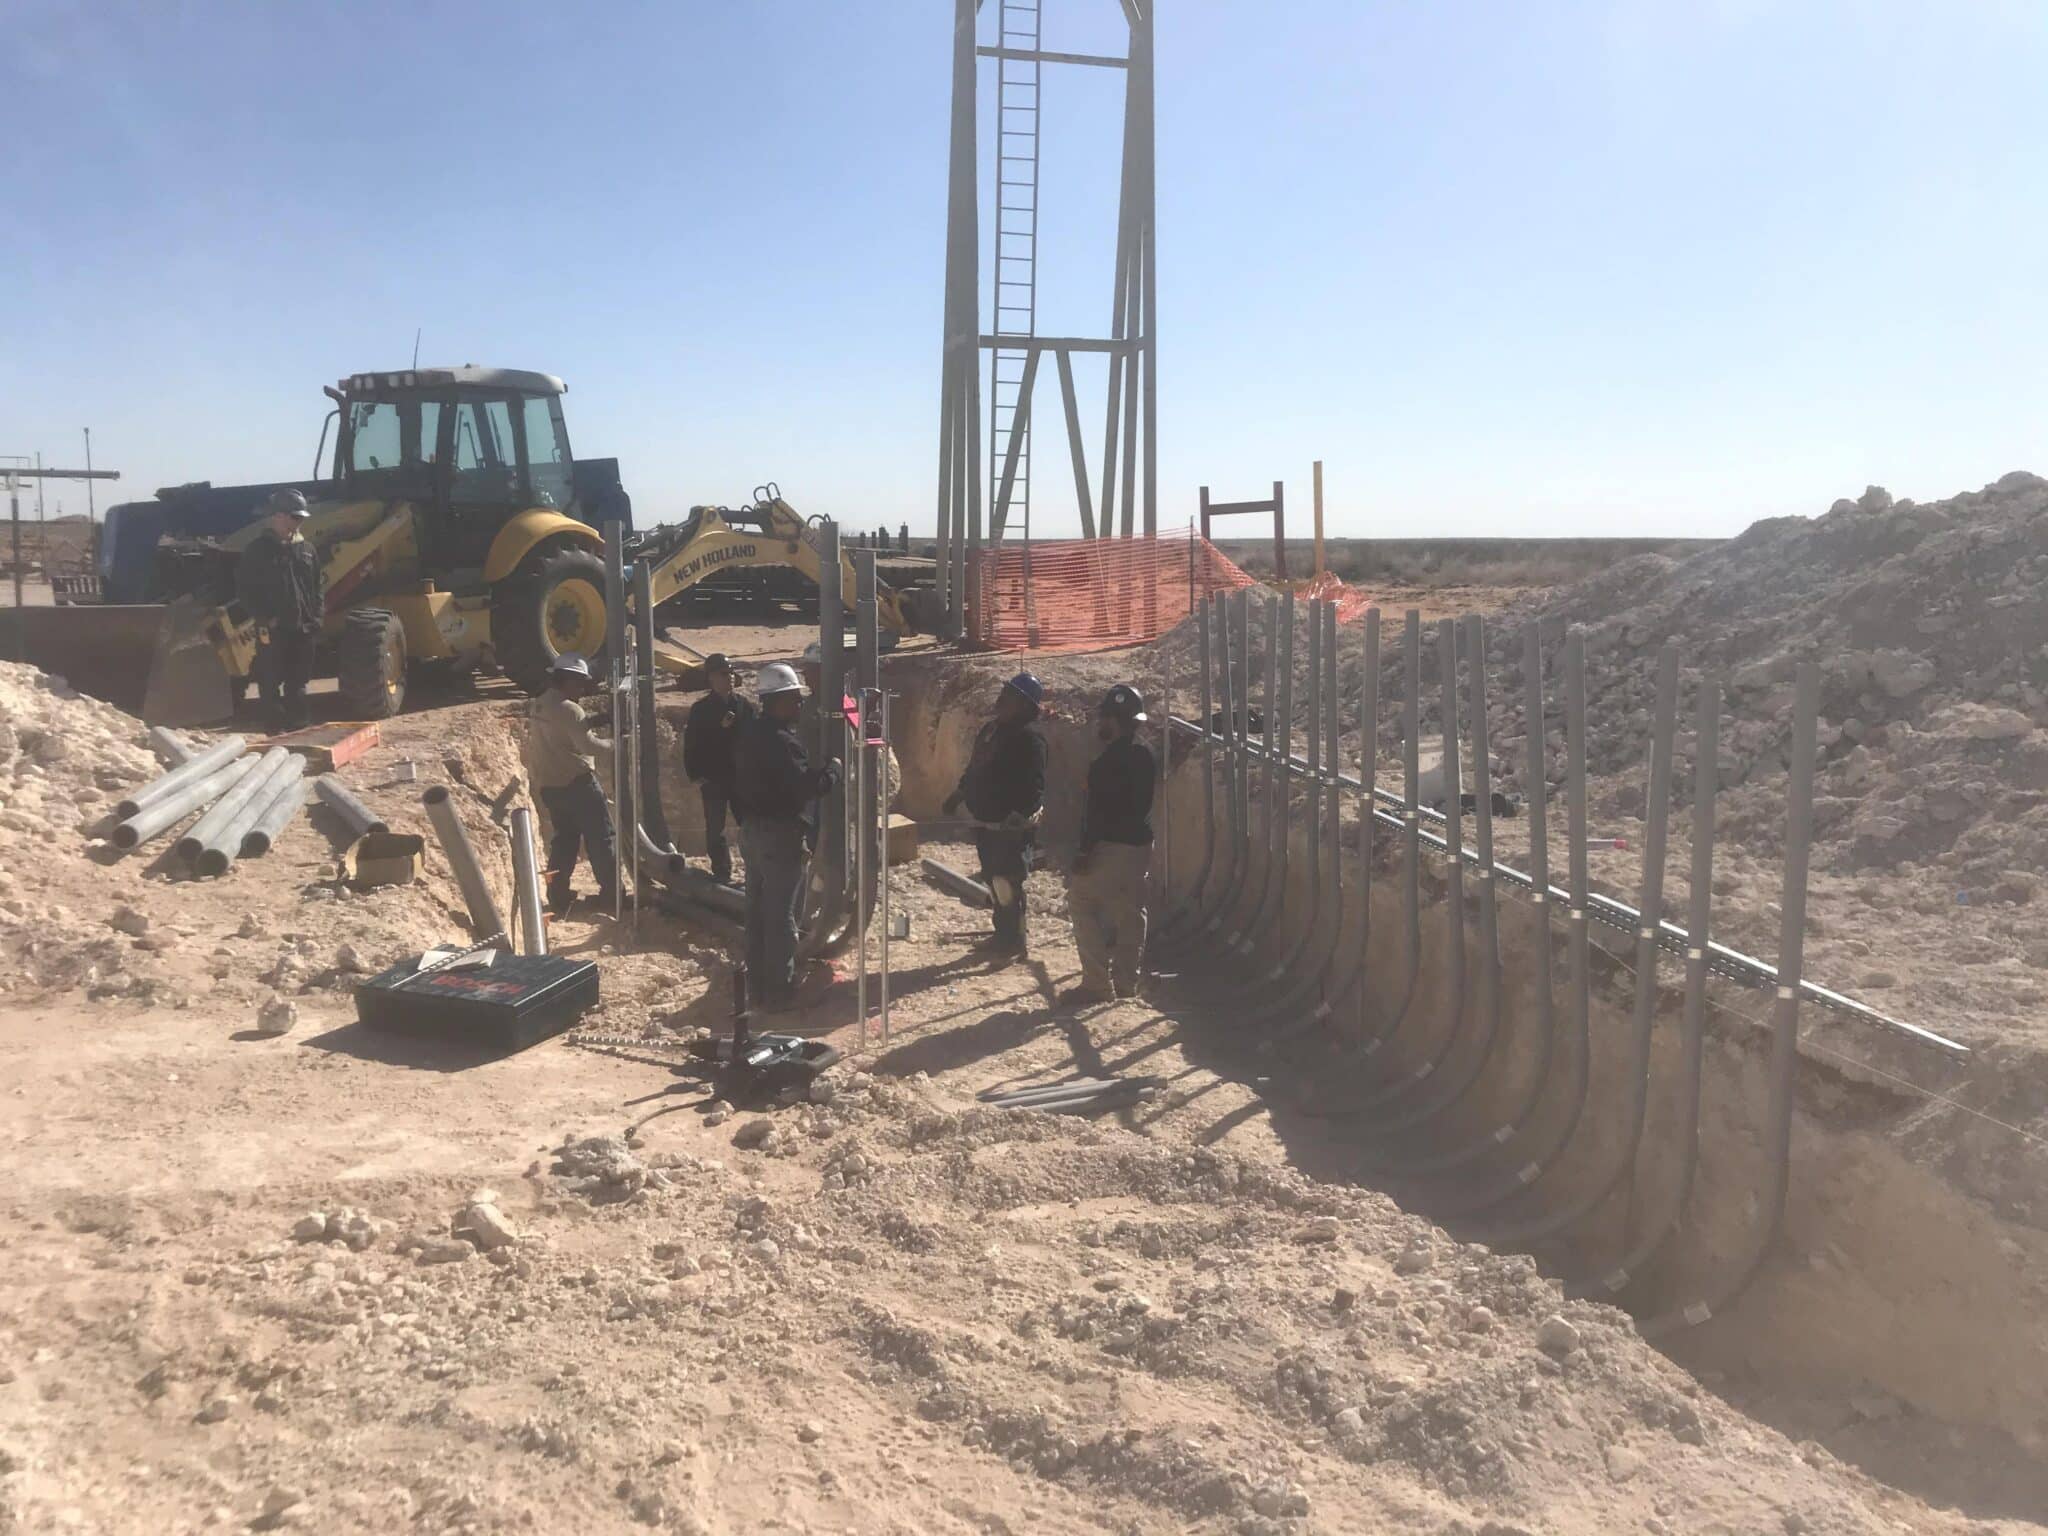 Men laying reinforced pipe in a dug out part of jobsite